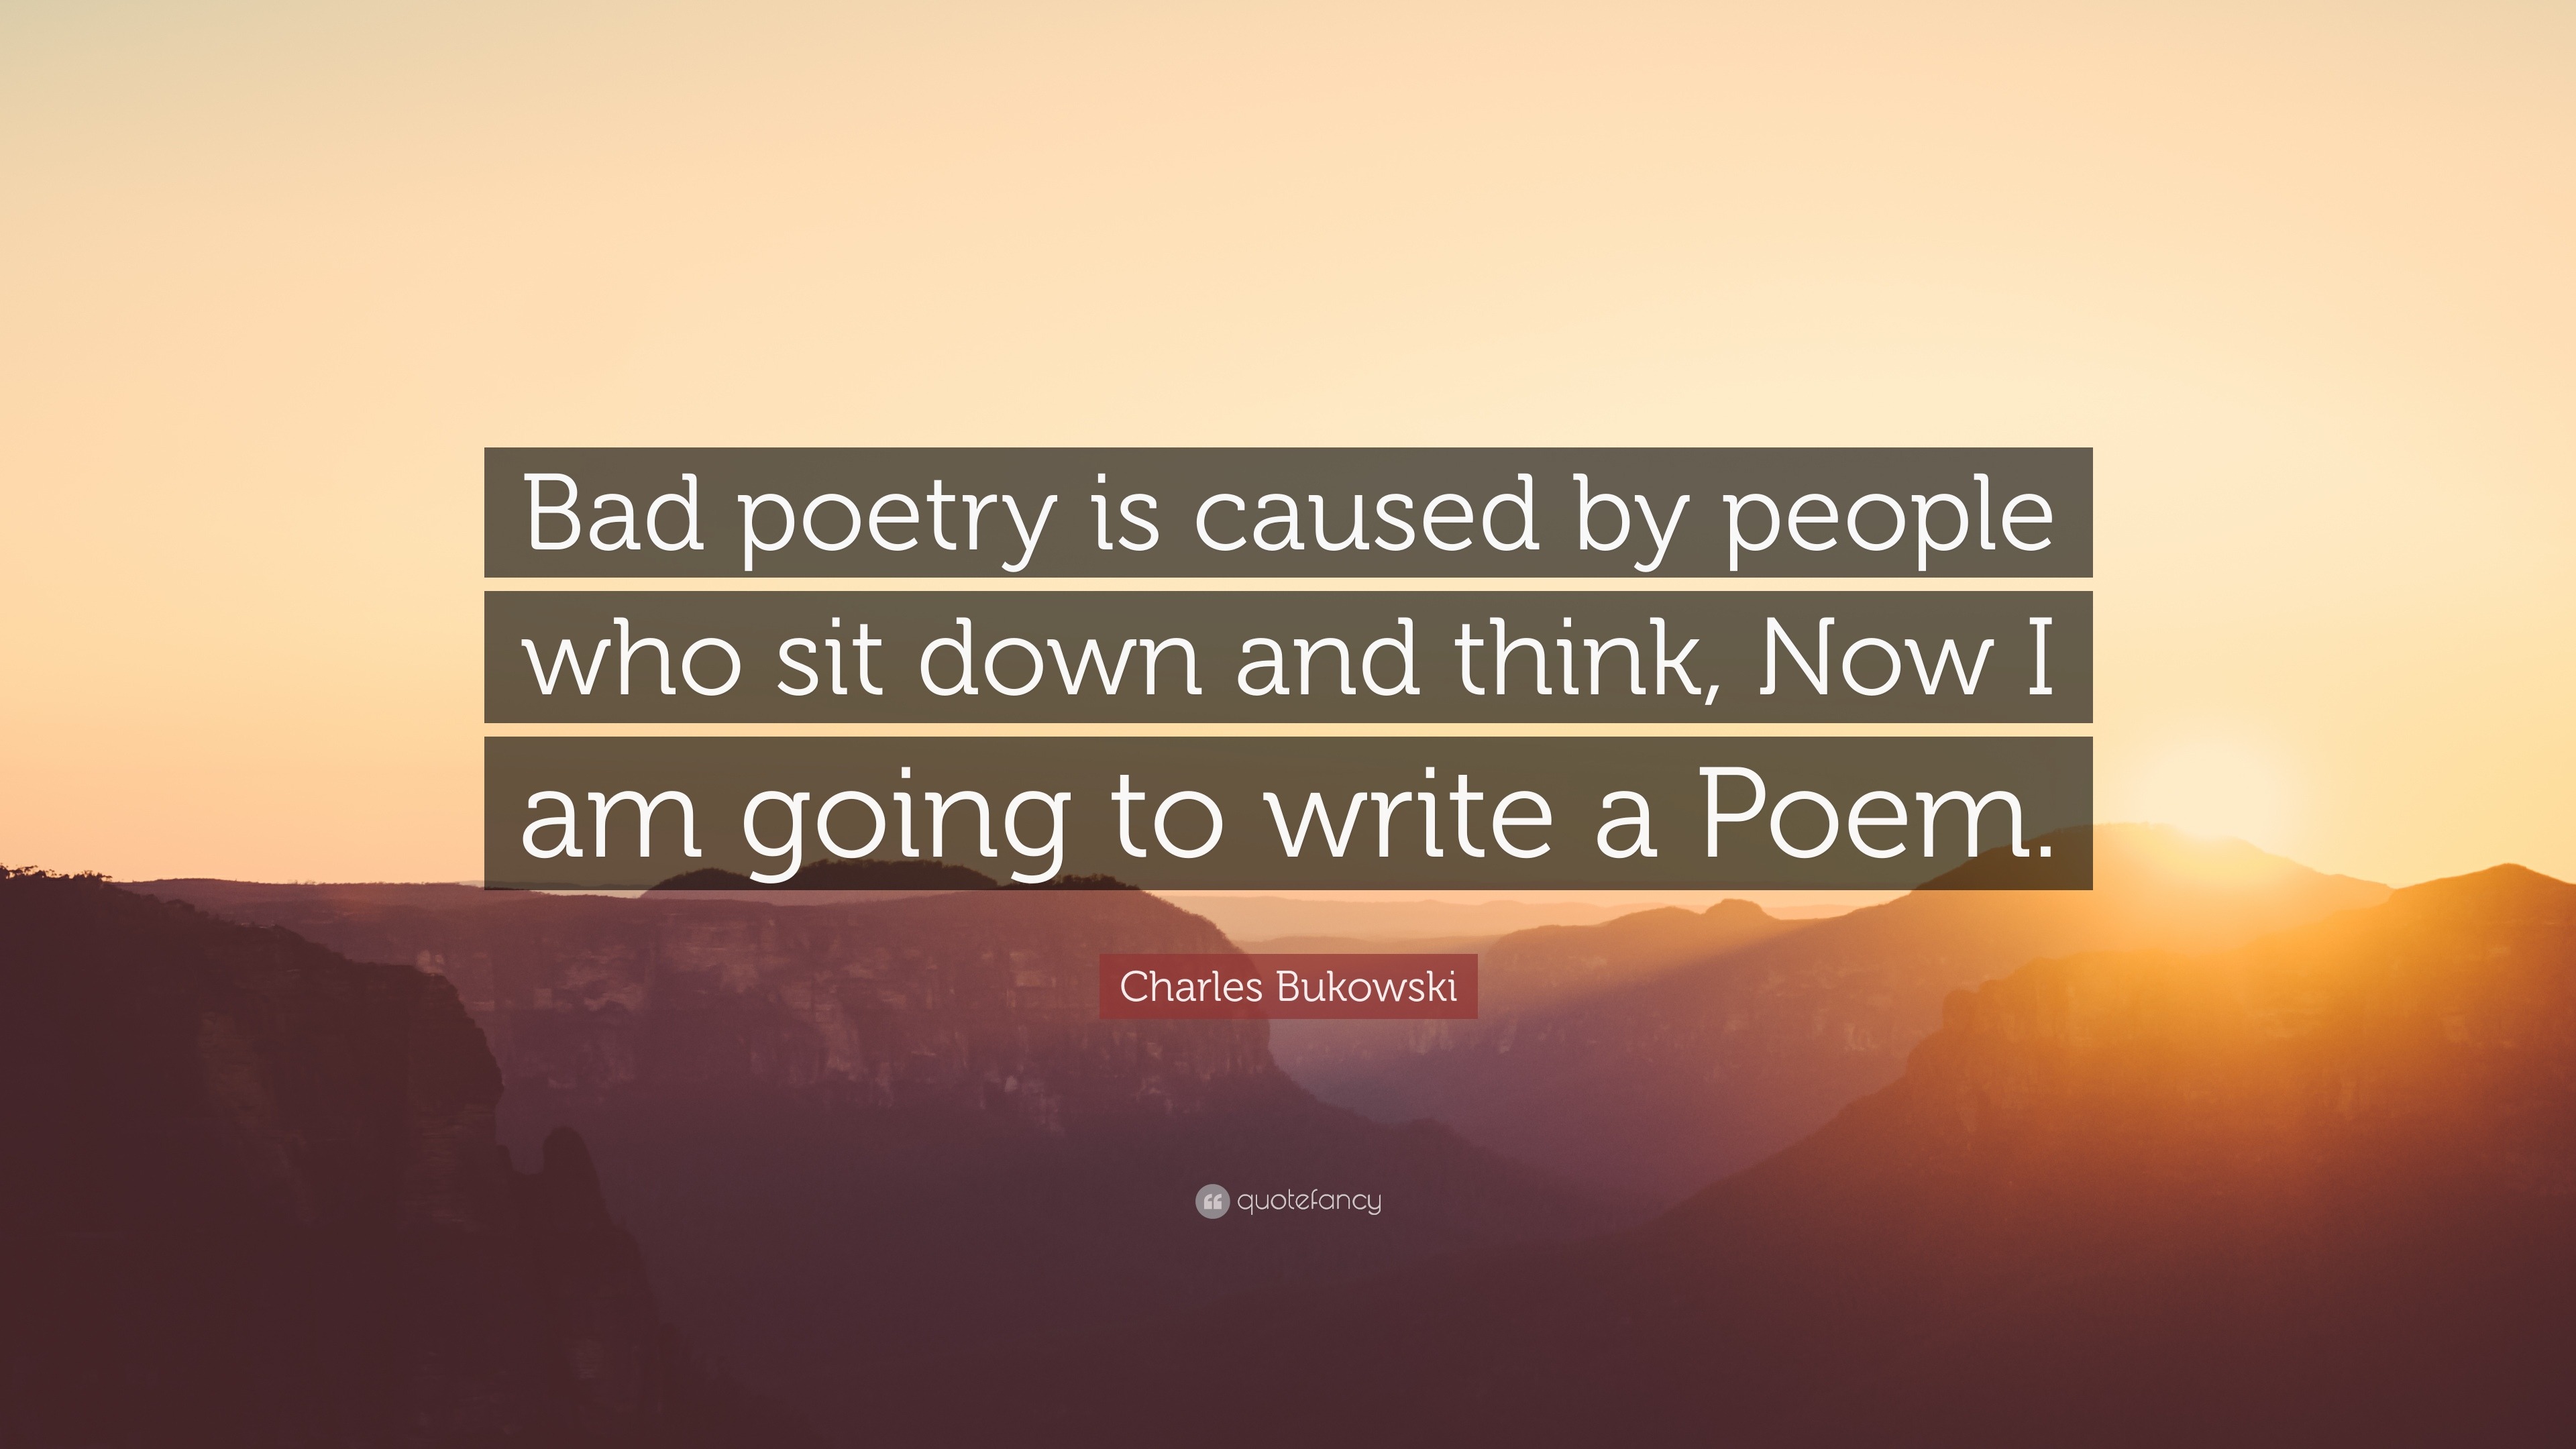 What is a bad poem?